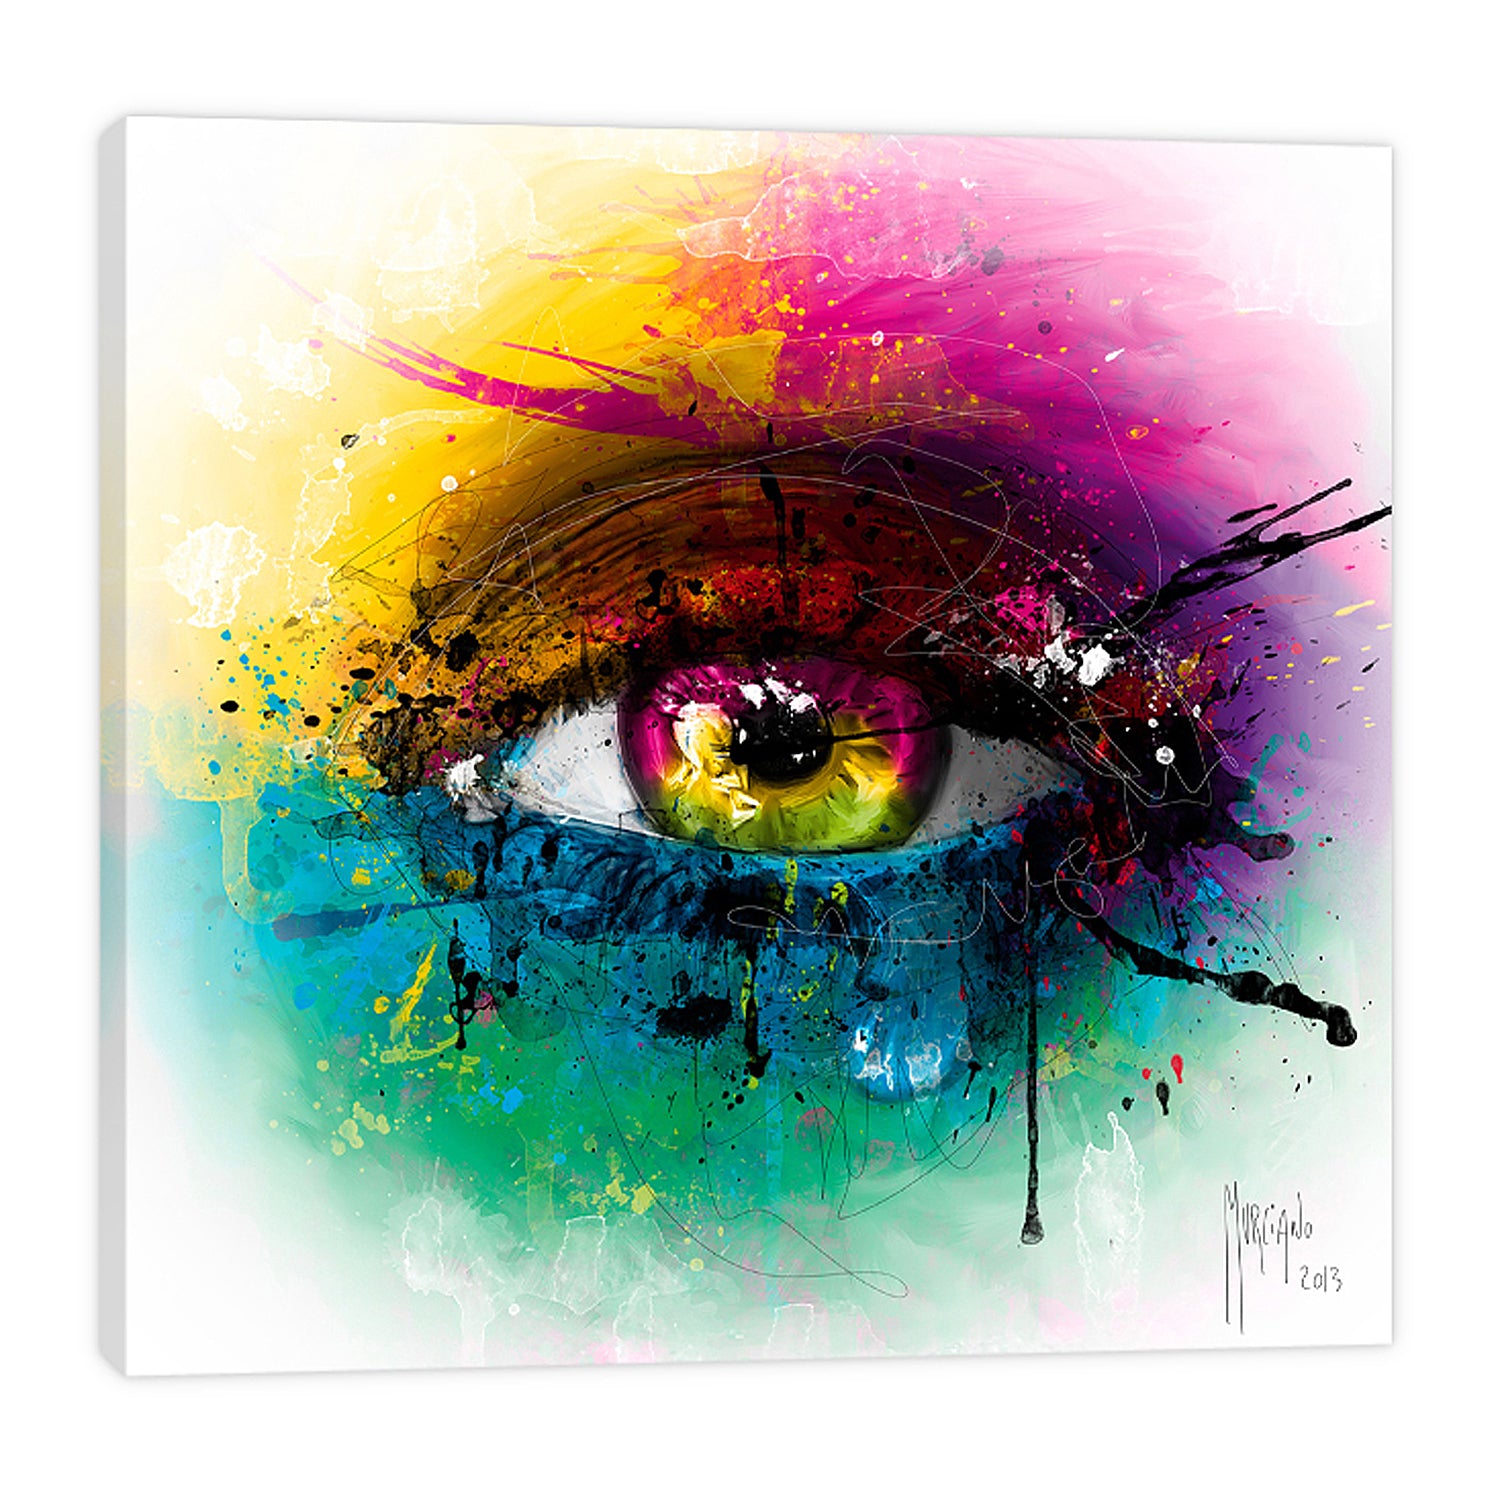 Patrice-Murciano,Modern & Contemporary,People,requiem for a dream,dreams,eyes,paint drips,splatters,ombre,Red,Lavender Purple,Mist Gray,Mint Green,Purple,Black,Navy Blue,Blue